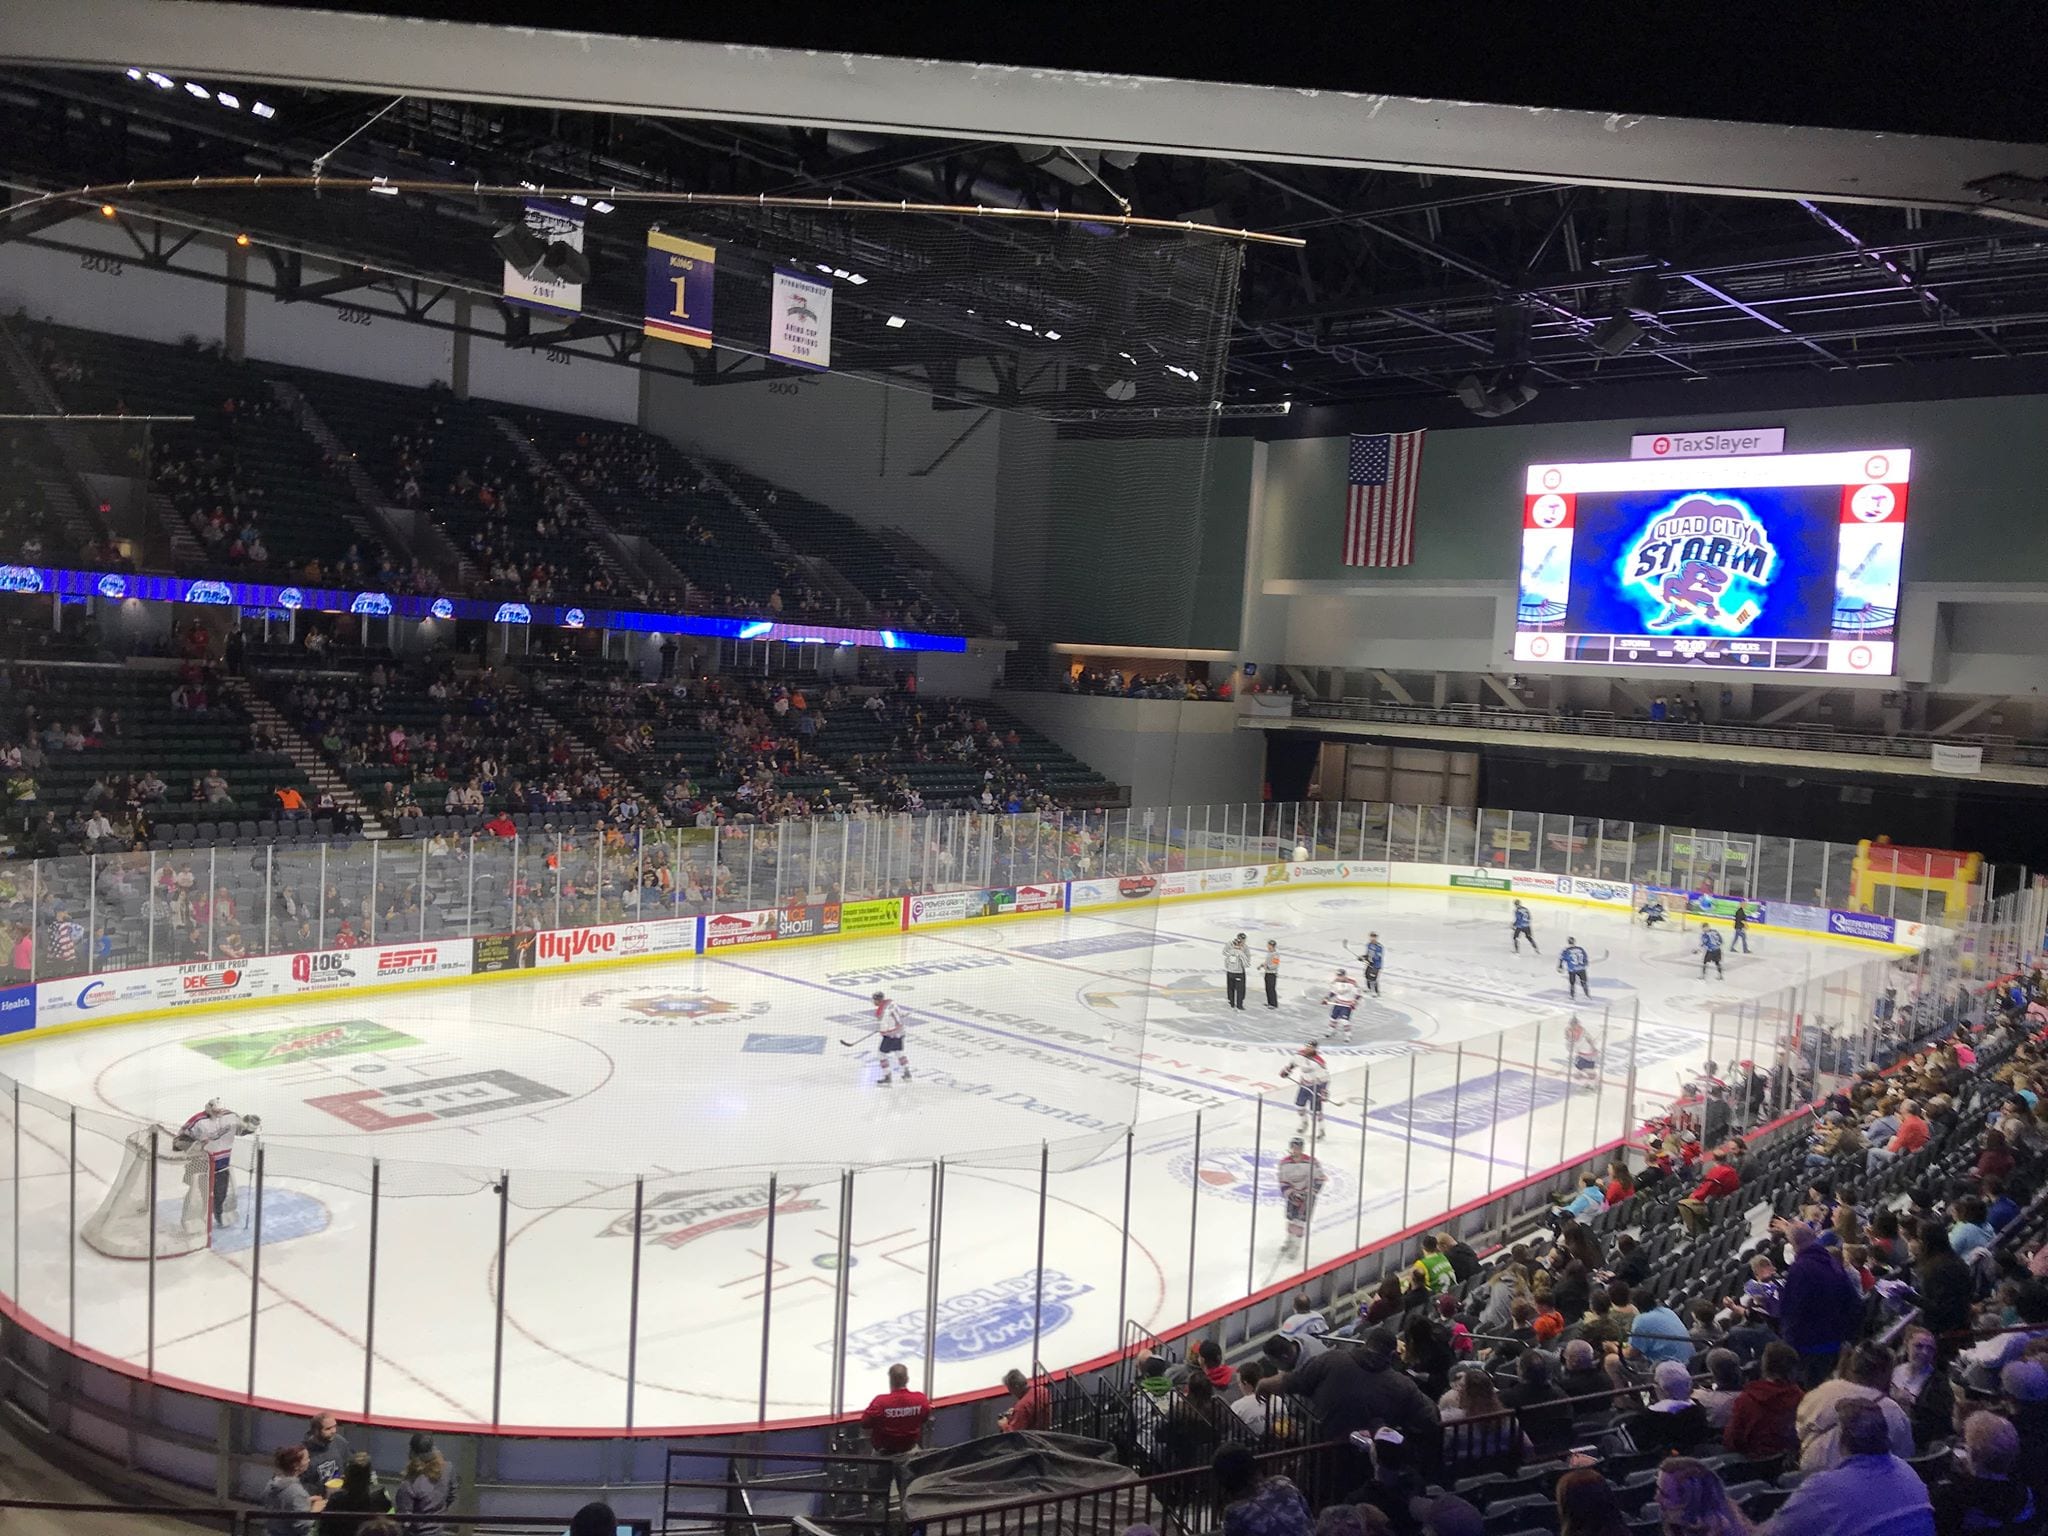 Quad City Storm Tickets Go On Sale Monday; Home Opener October 20